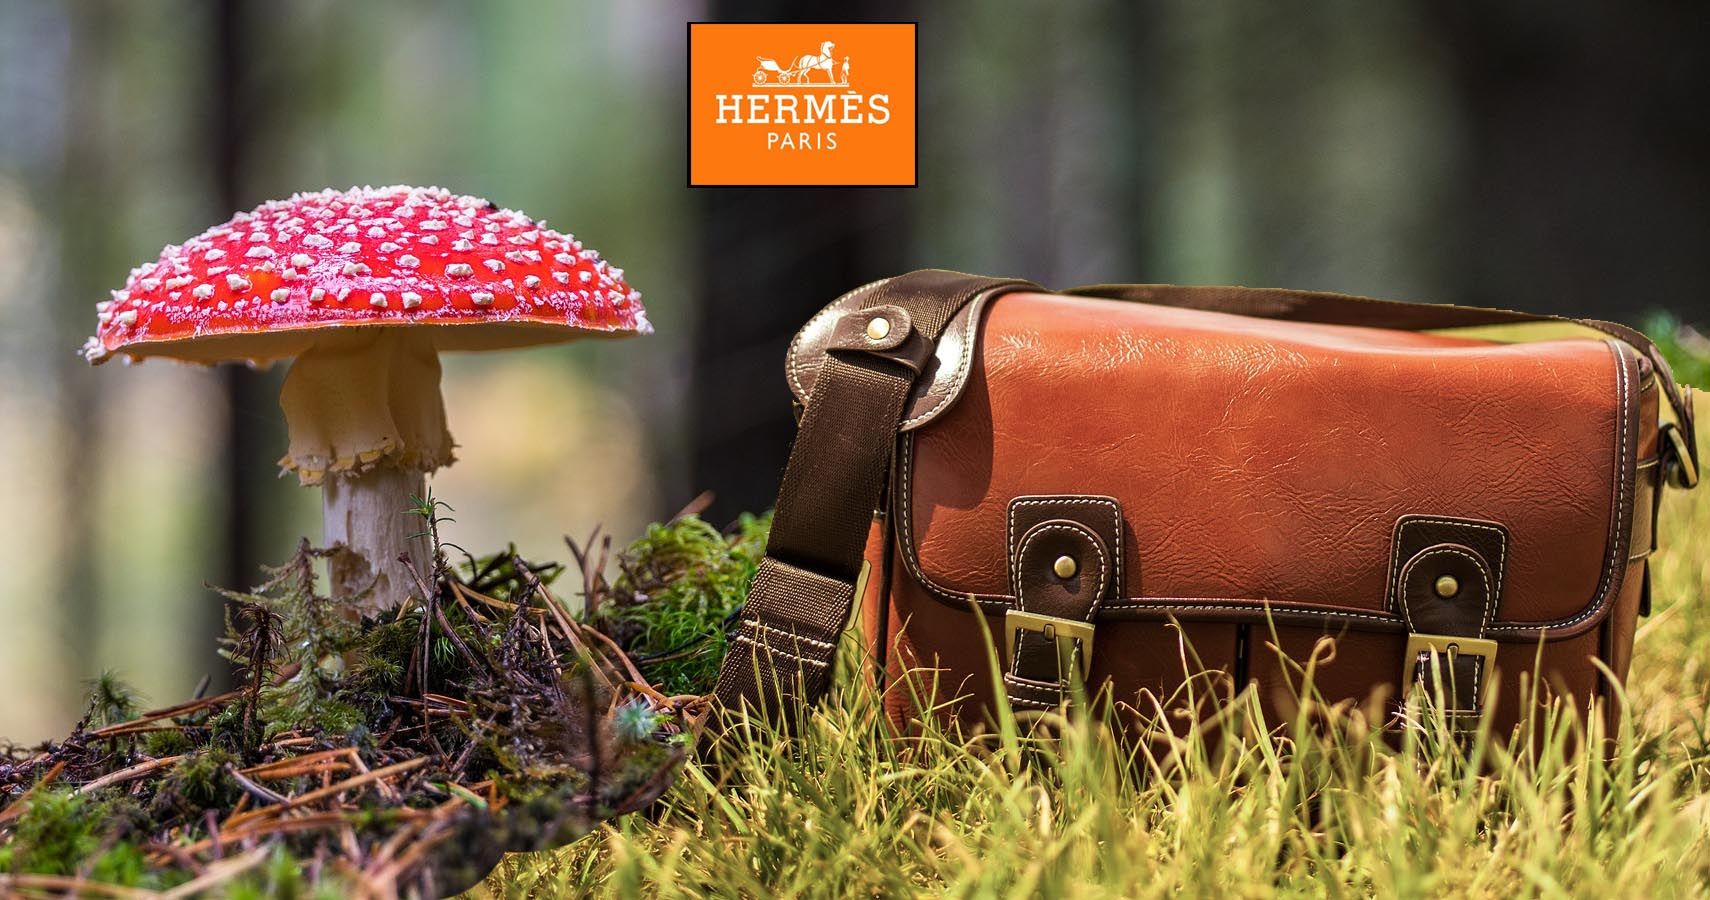 Hermès Launches Bag Made From Mushroom Leather